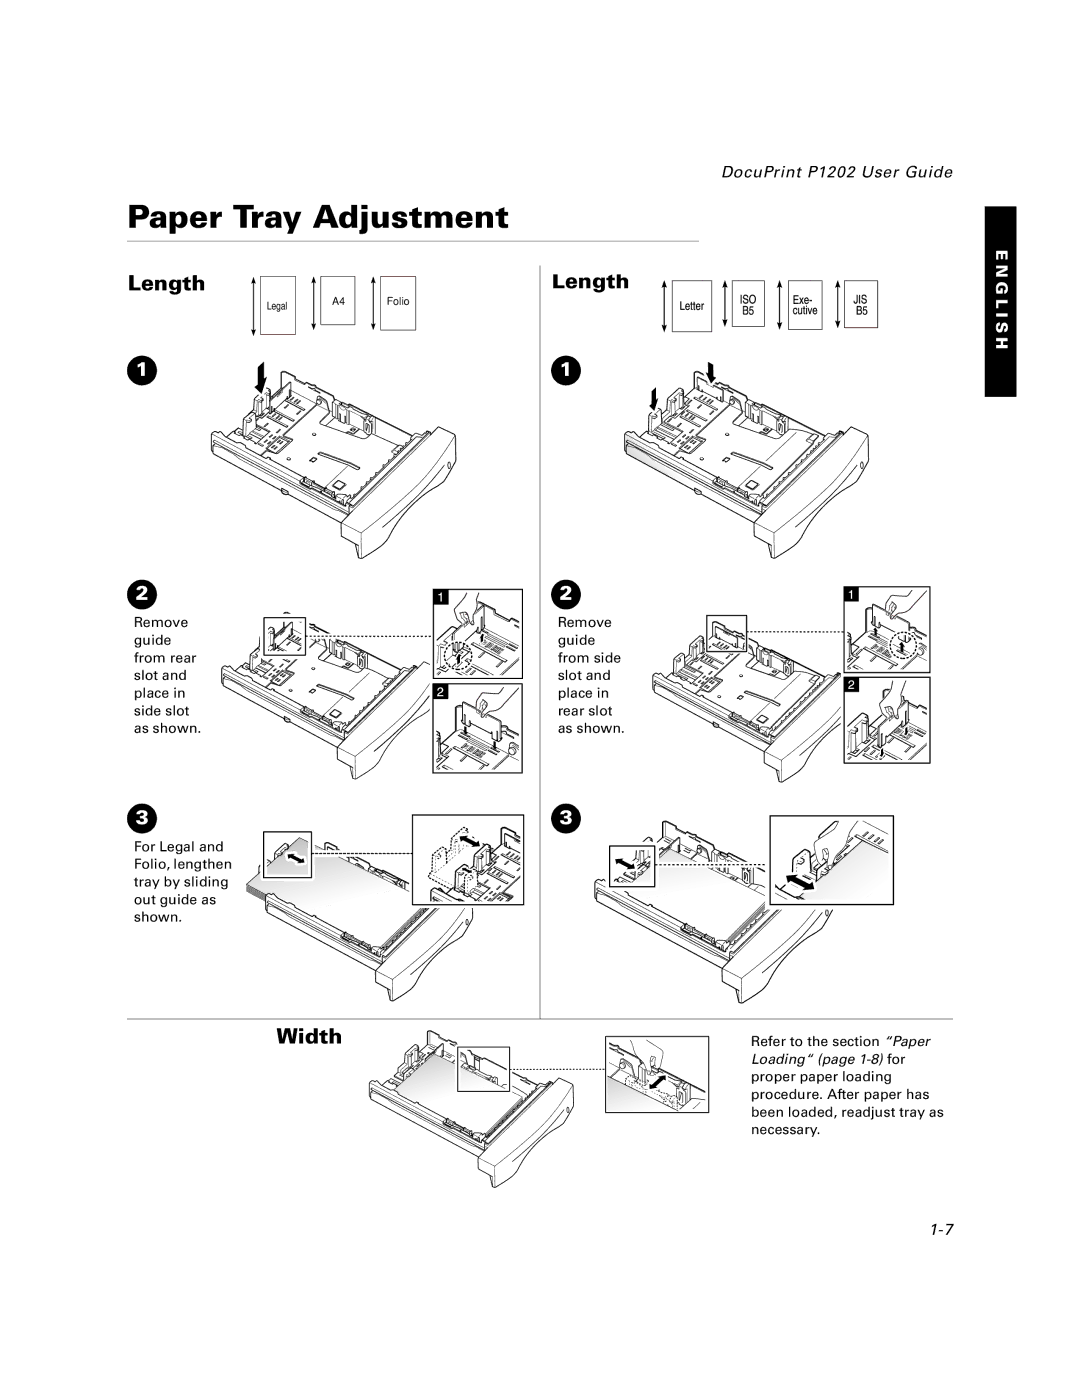 Xerox P1202 specifications Paper Tray Adjustment, Length 